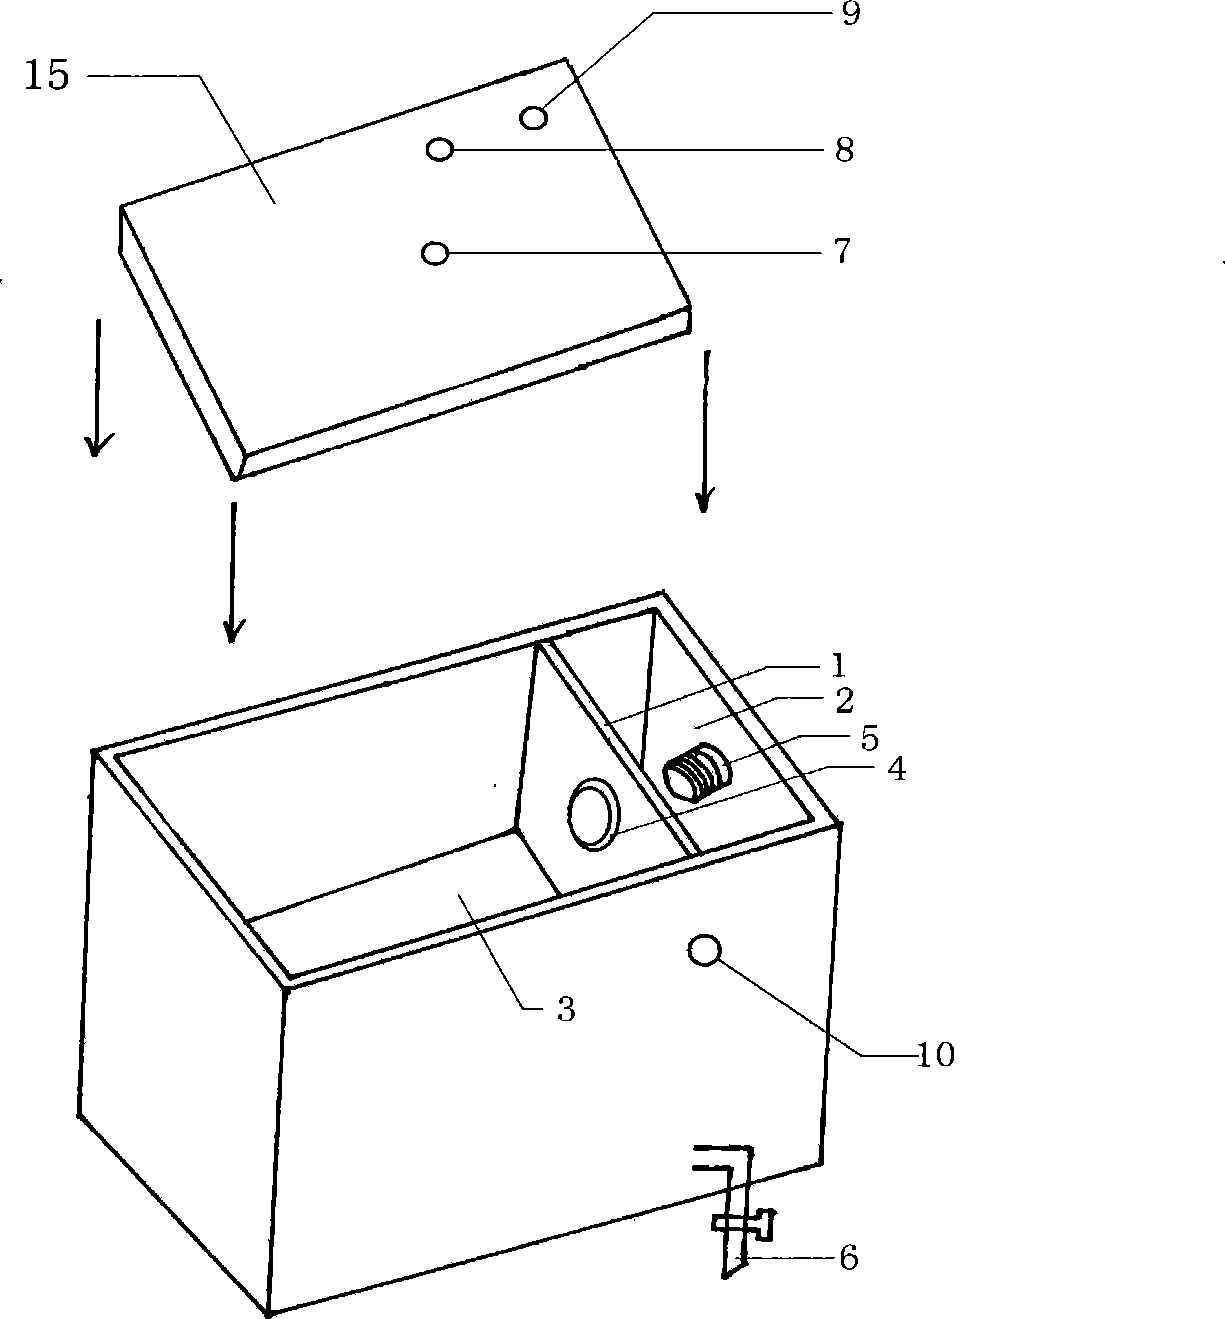 Apparatus and method for measuring welding tube corrosion under stress condition